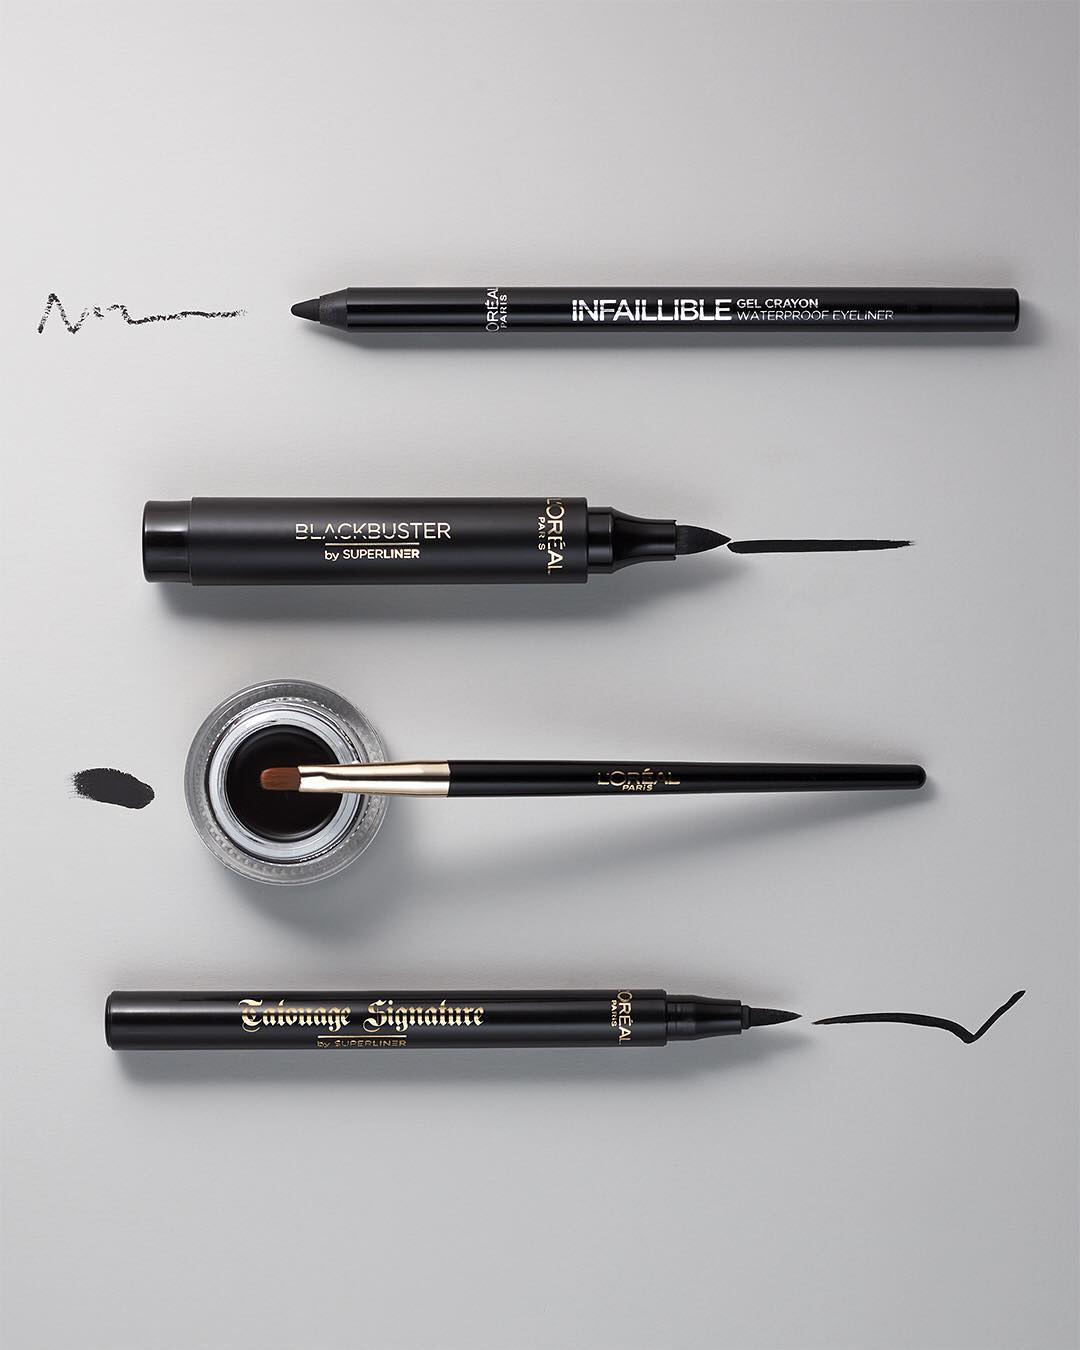 Tips to choose your line for eyeliner